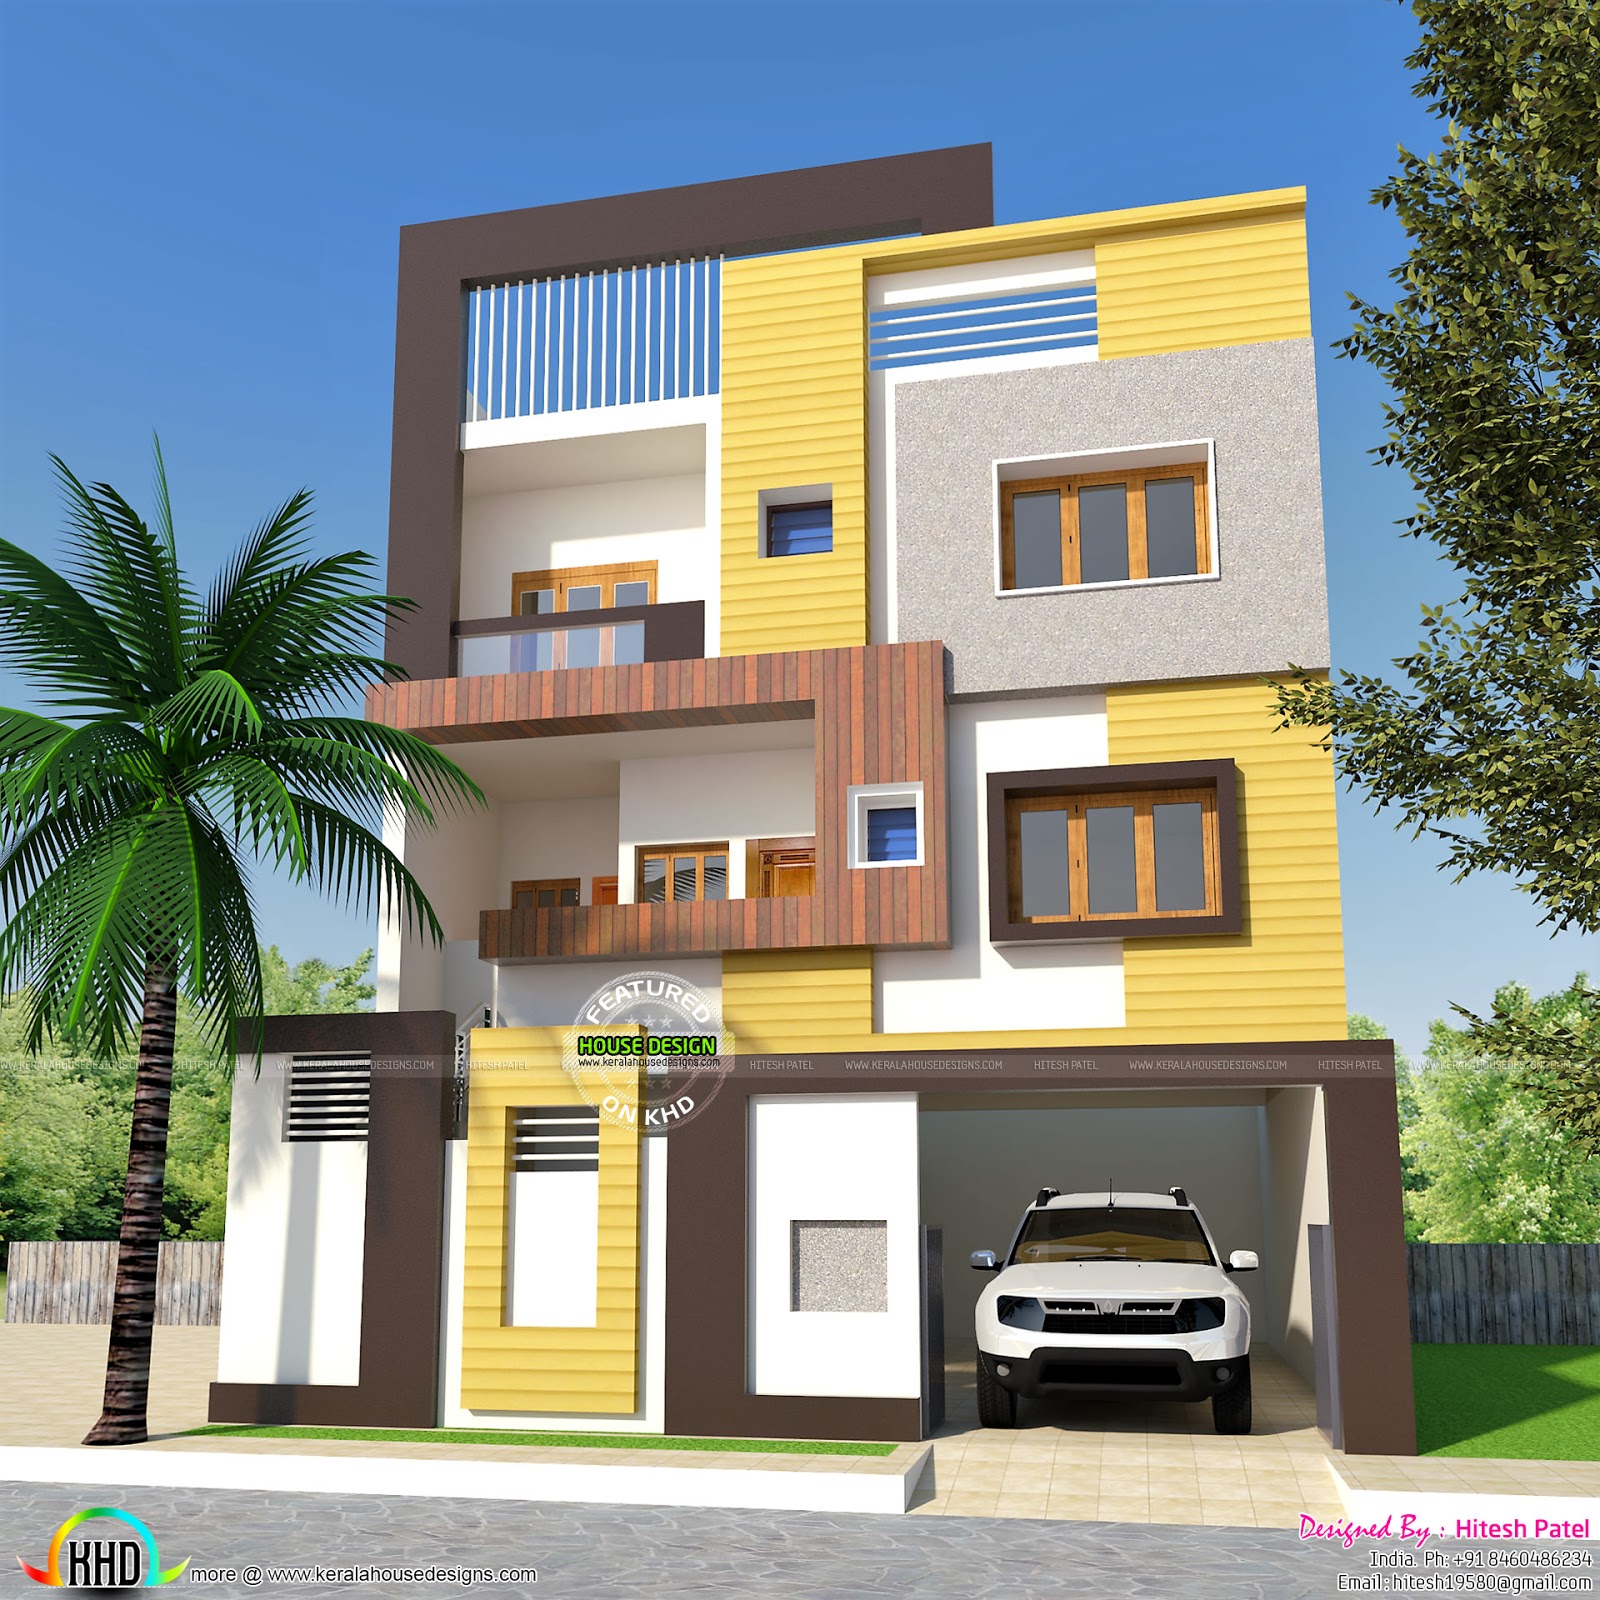 2 BHK small double storied home  1200  sq  ft  Kerala home  